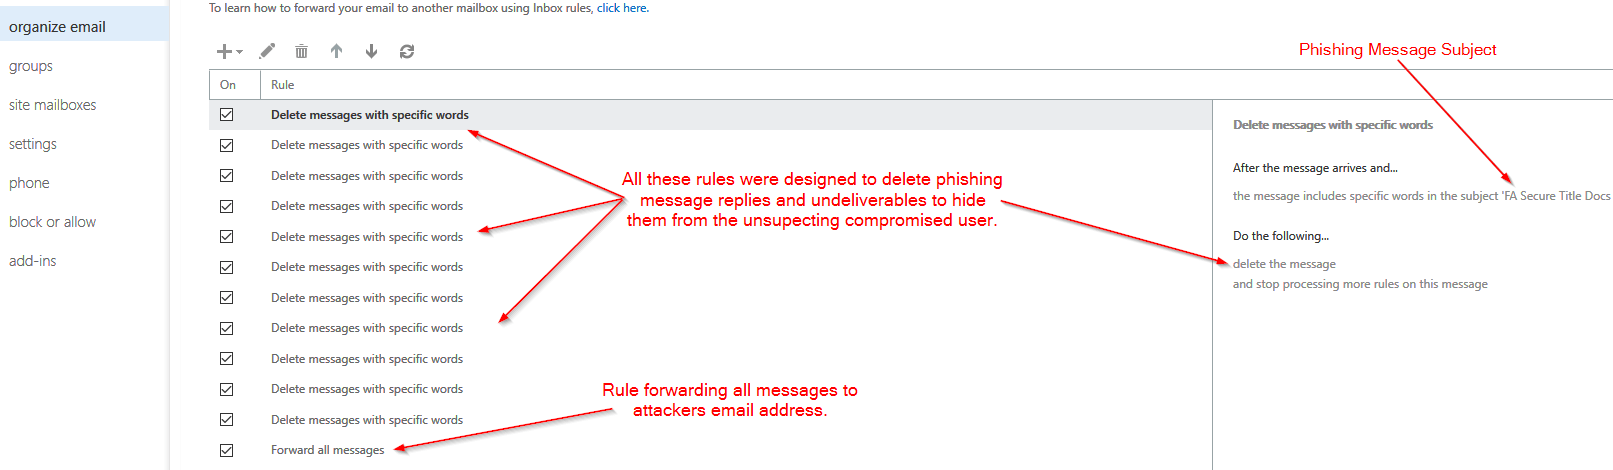 Mail Rules Created by Attacker